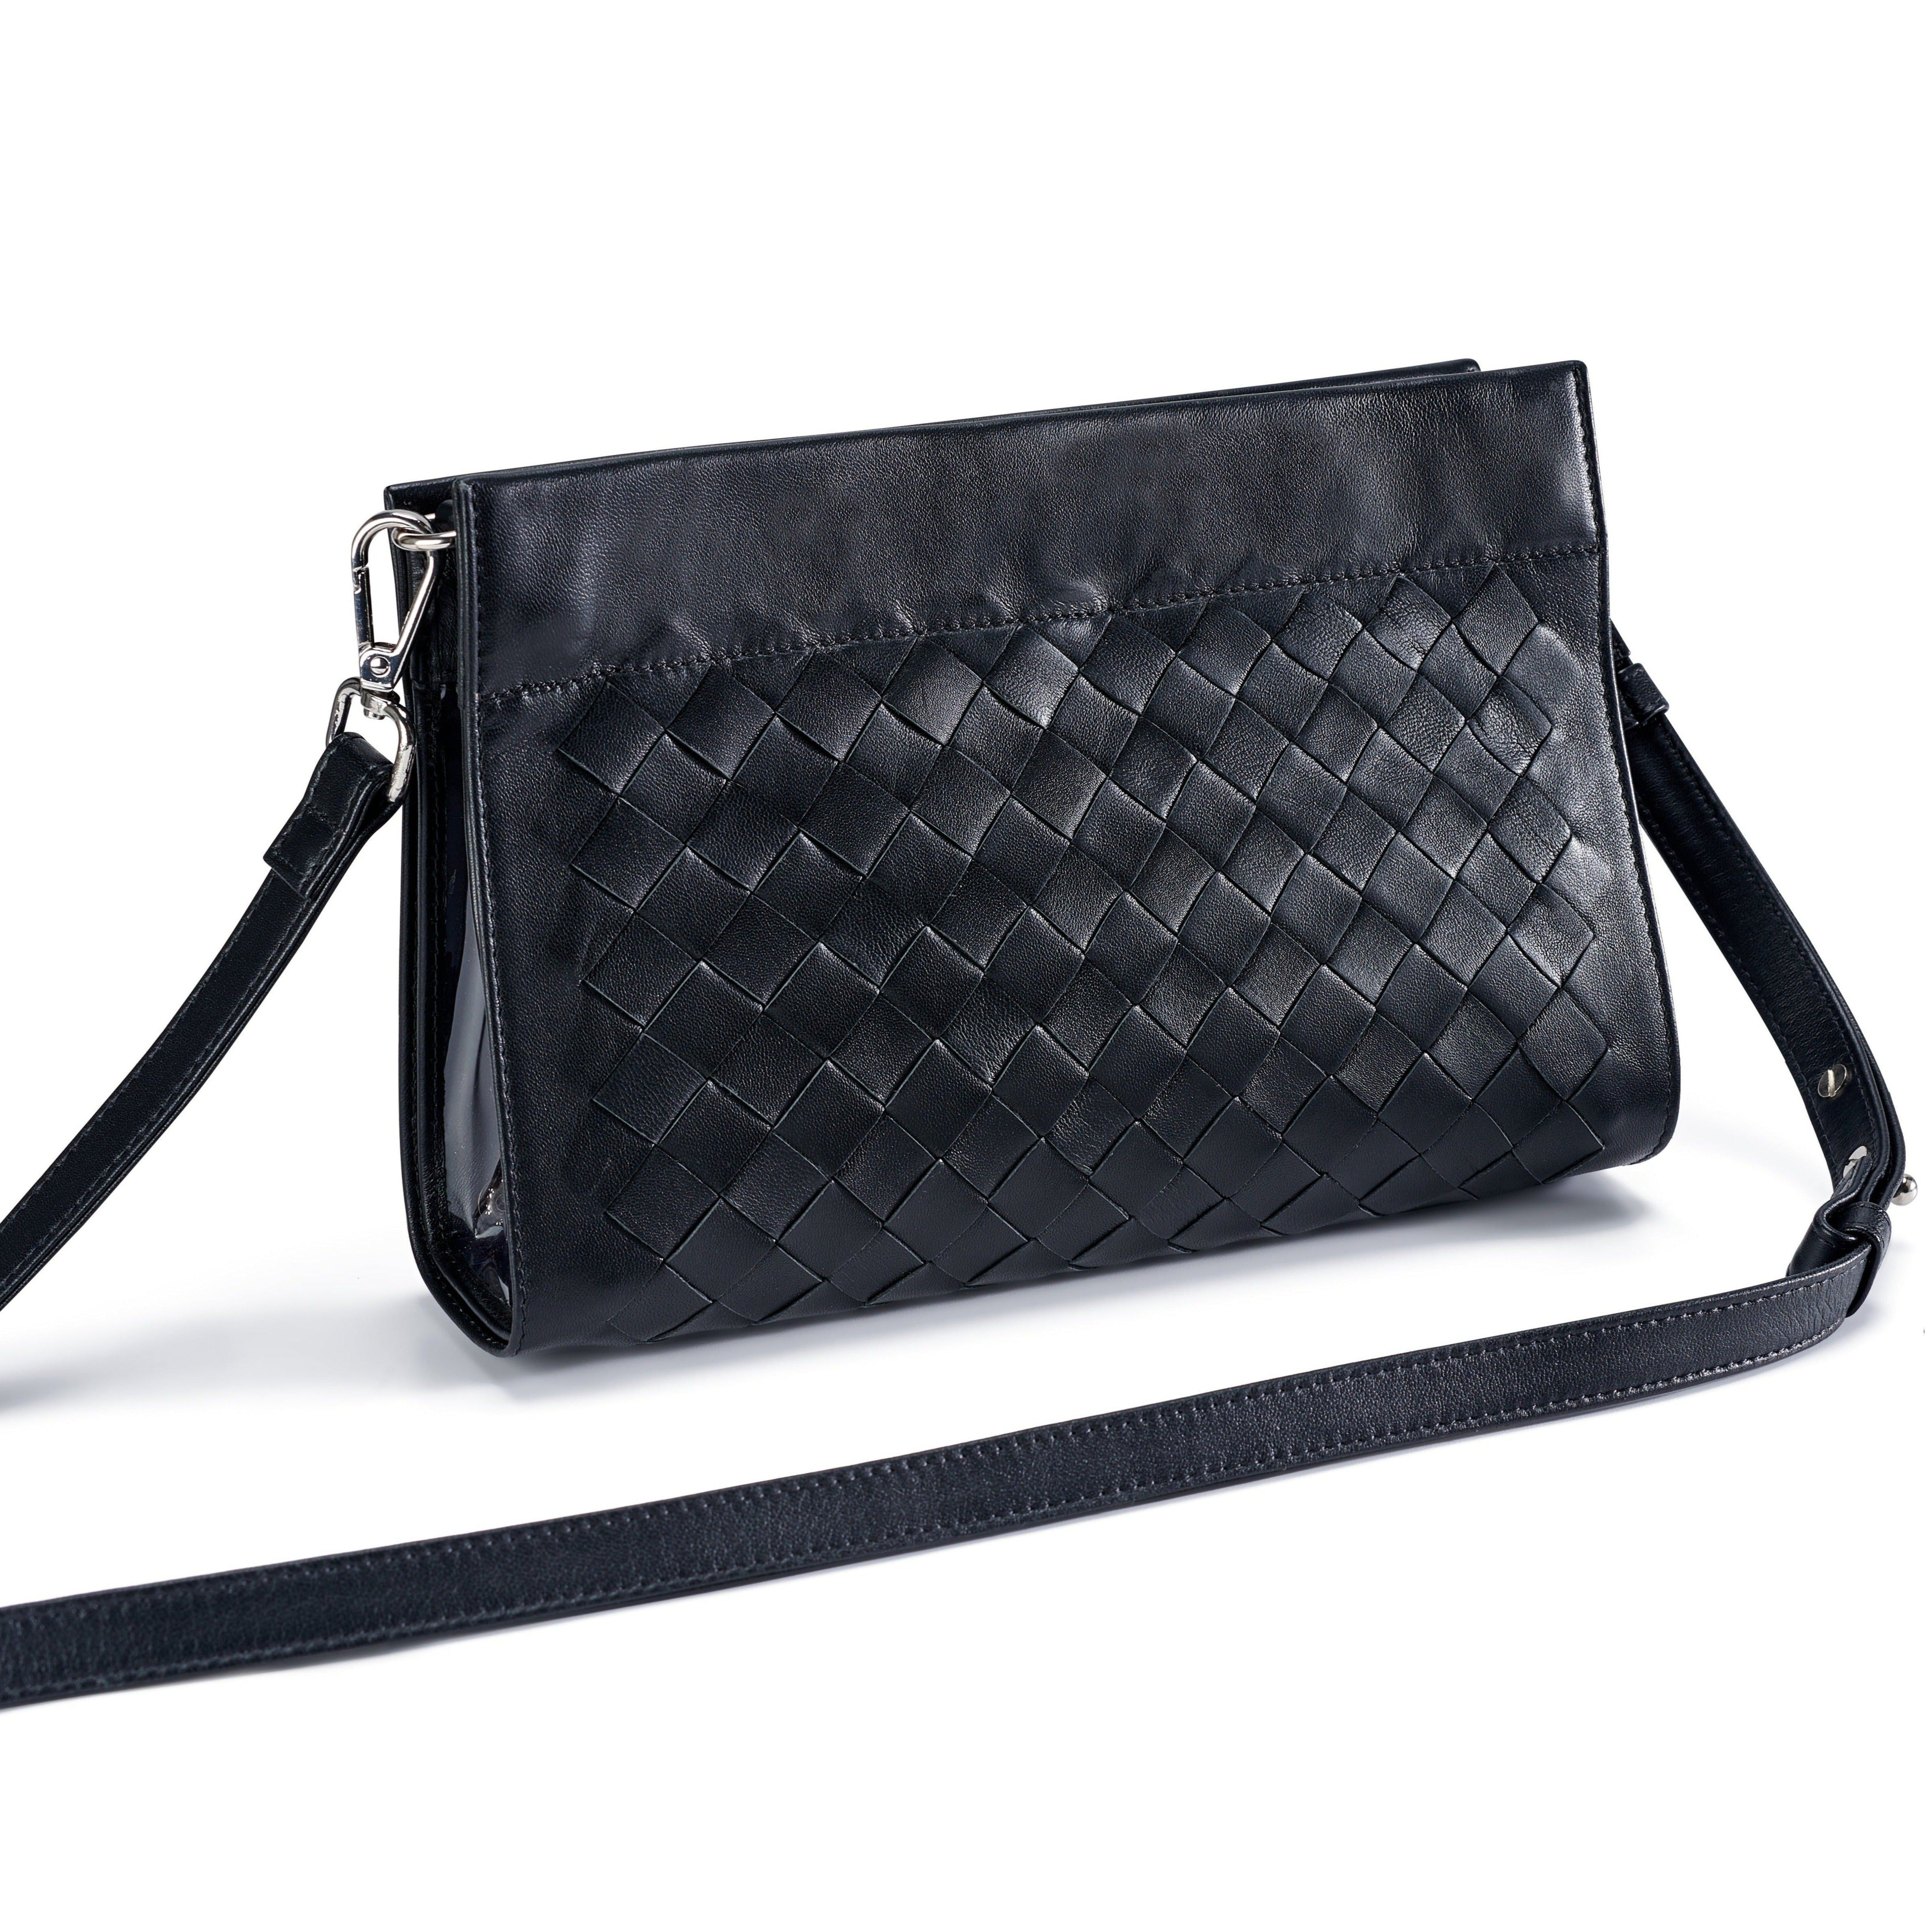 Black Woven Cover and Classic Clear Bag Combination